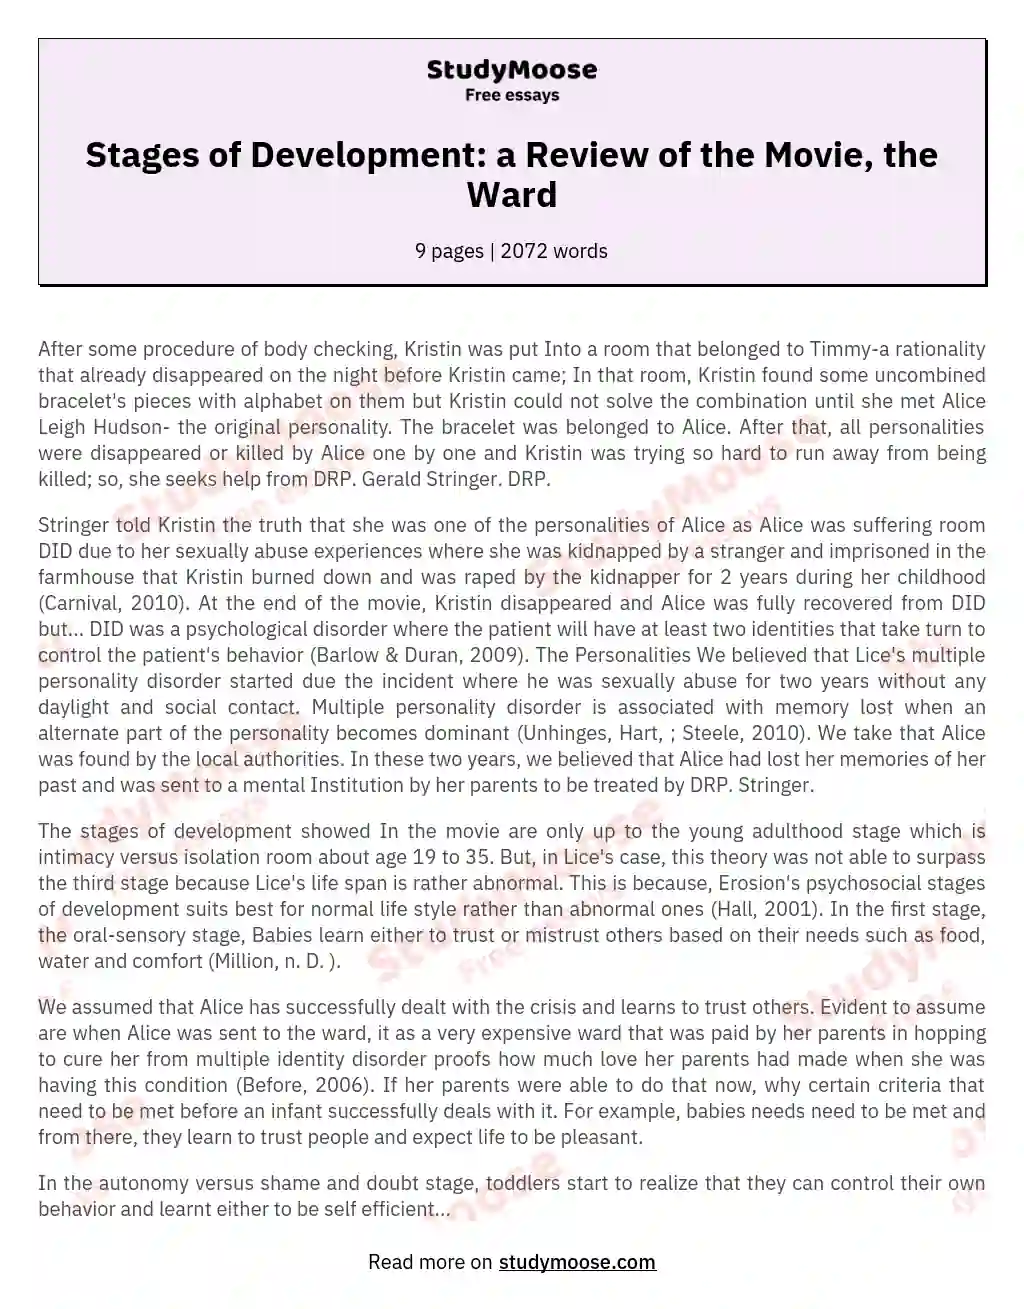 Stages of Development: a Review of the Movie, the Ward essay